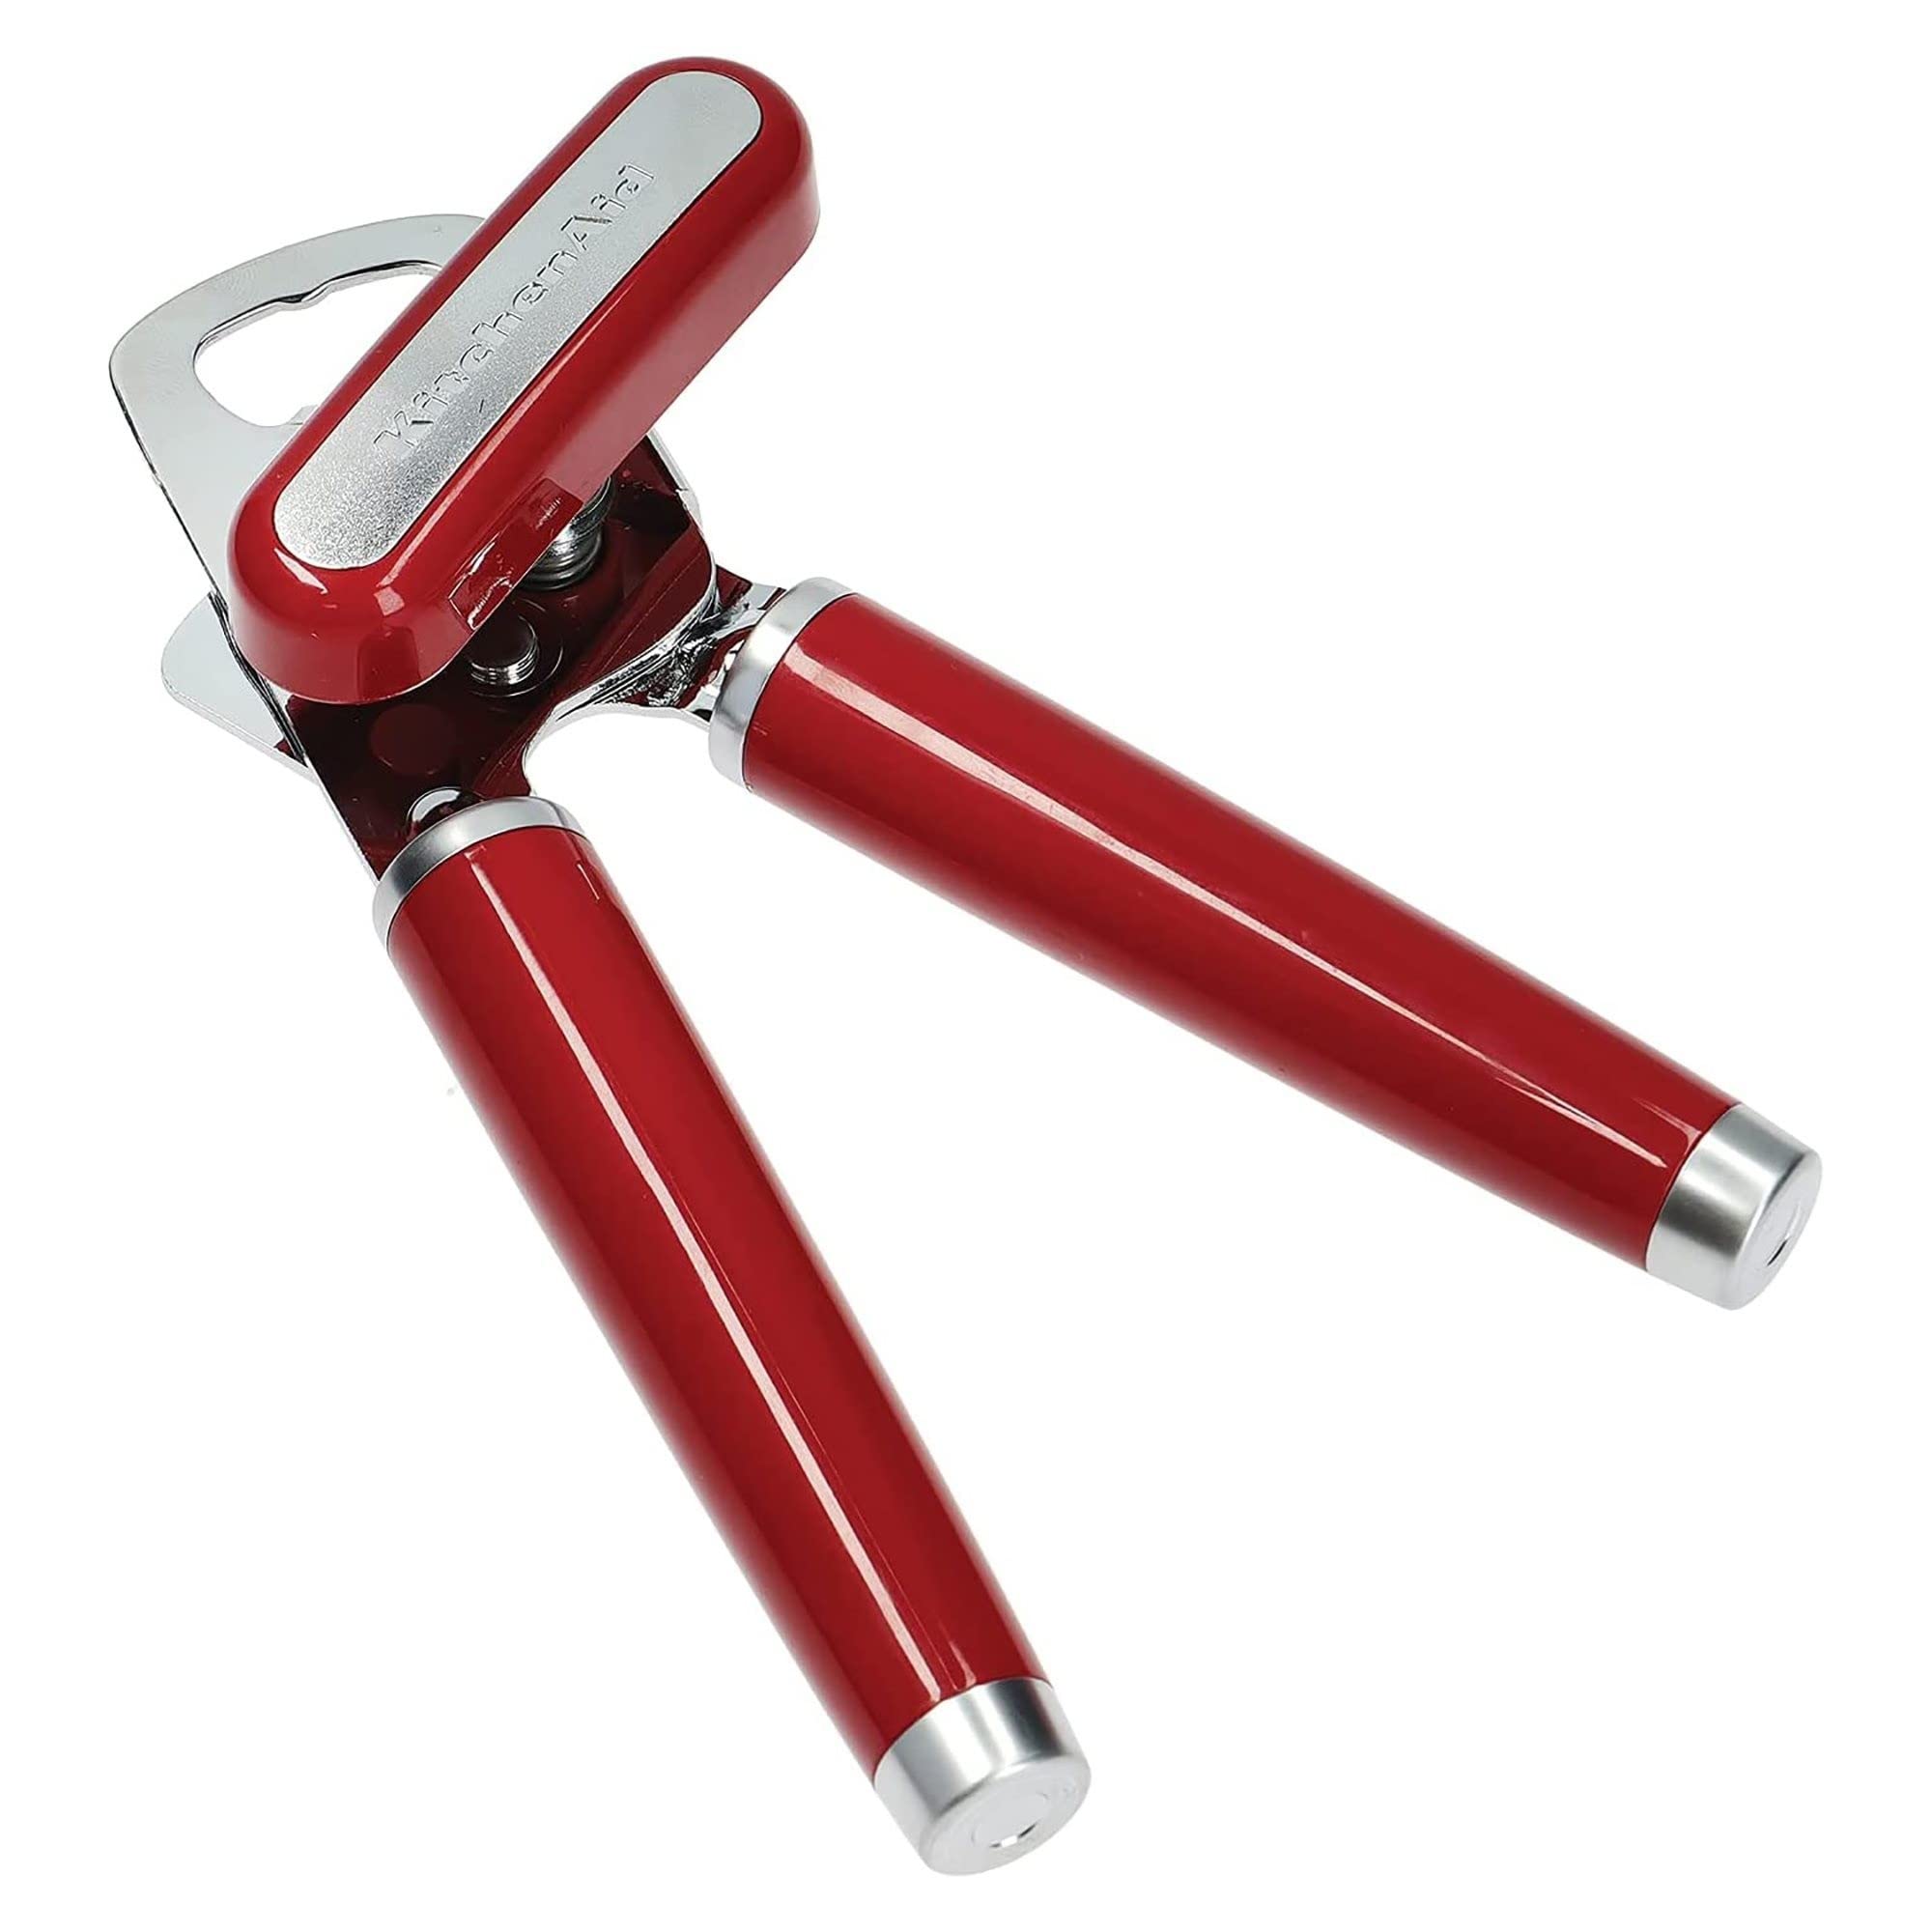 KitchenAid Classic Multifunction Can Opener / Bottle Opener, 8.34-Inch, Empire Red